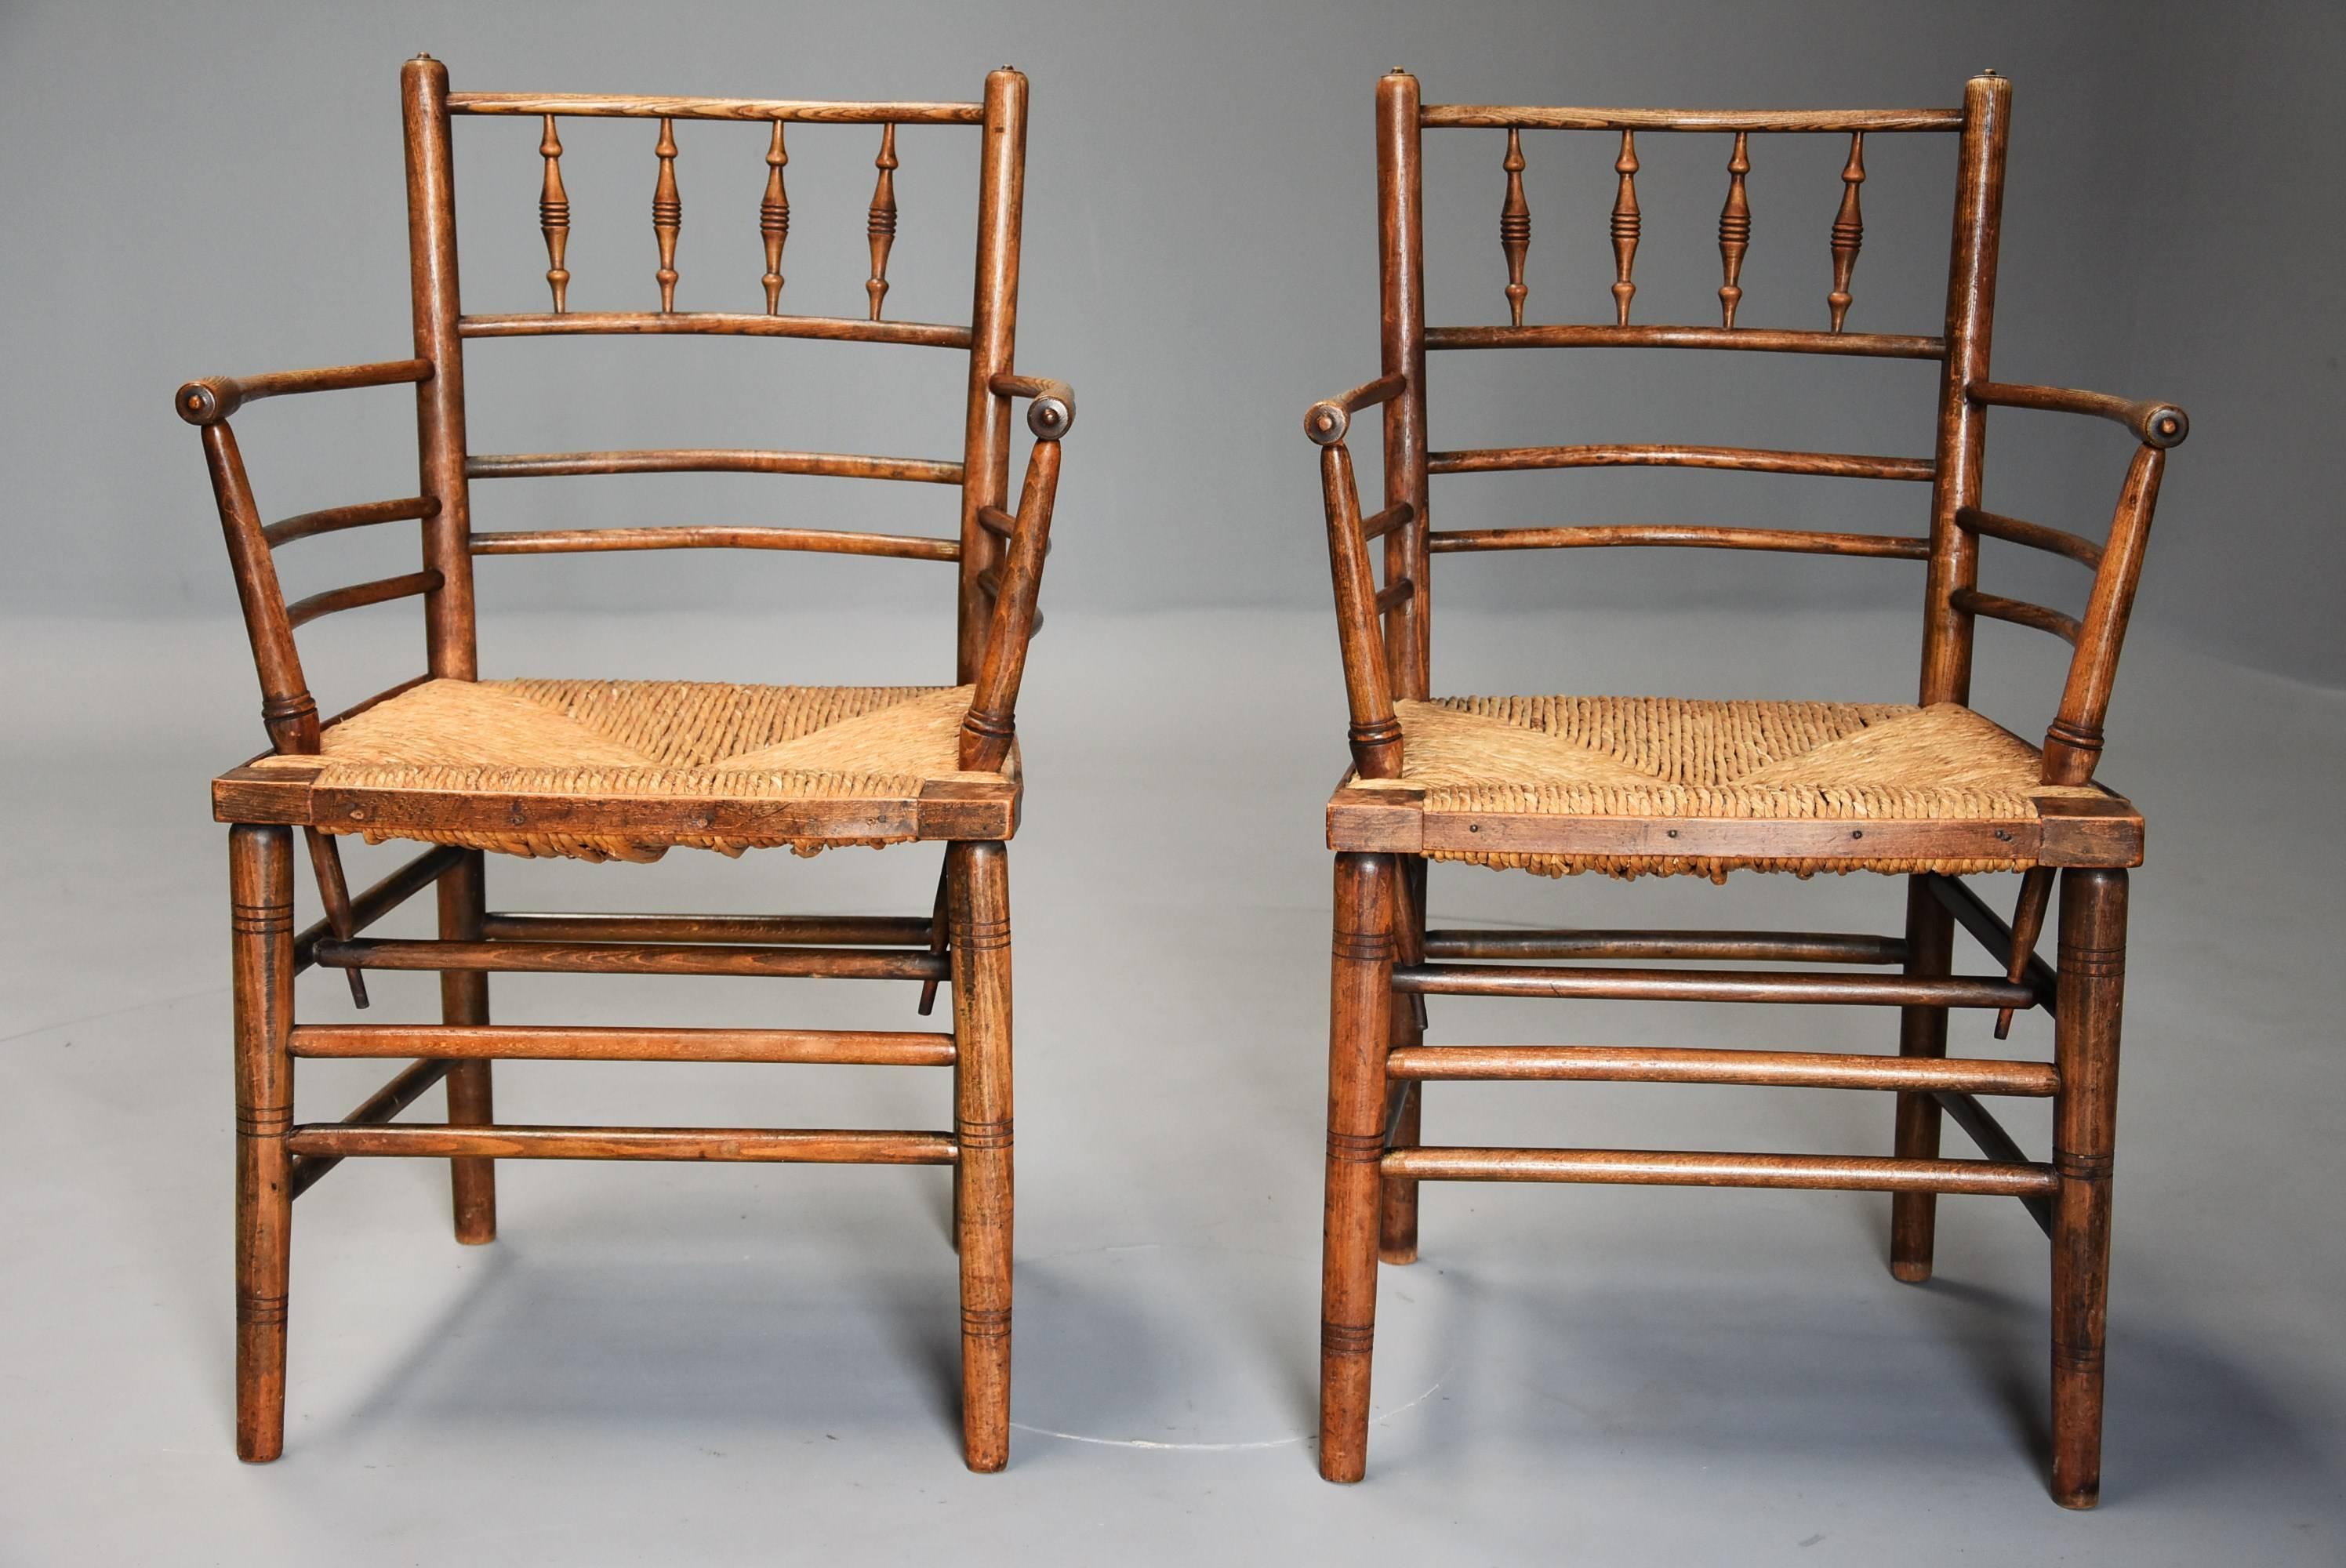 A pair of ash and beech Morris & Co. Sussex armchairs designed by Phillip Webb.

This pair of armchairs are unusual as they are not ebonized which is often the case with this design of chair, instead the backs, arms and back legs are ash, the